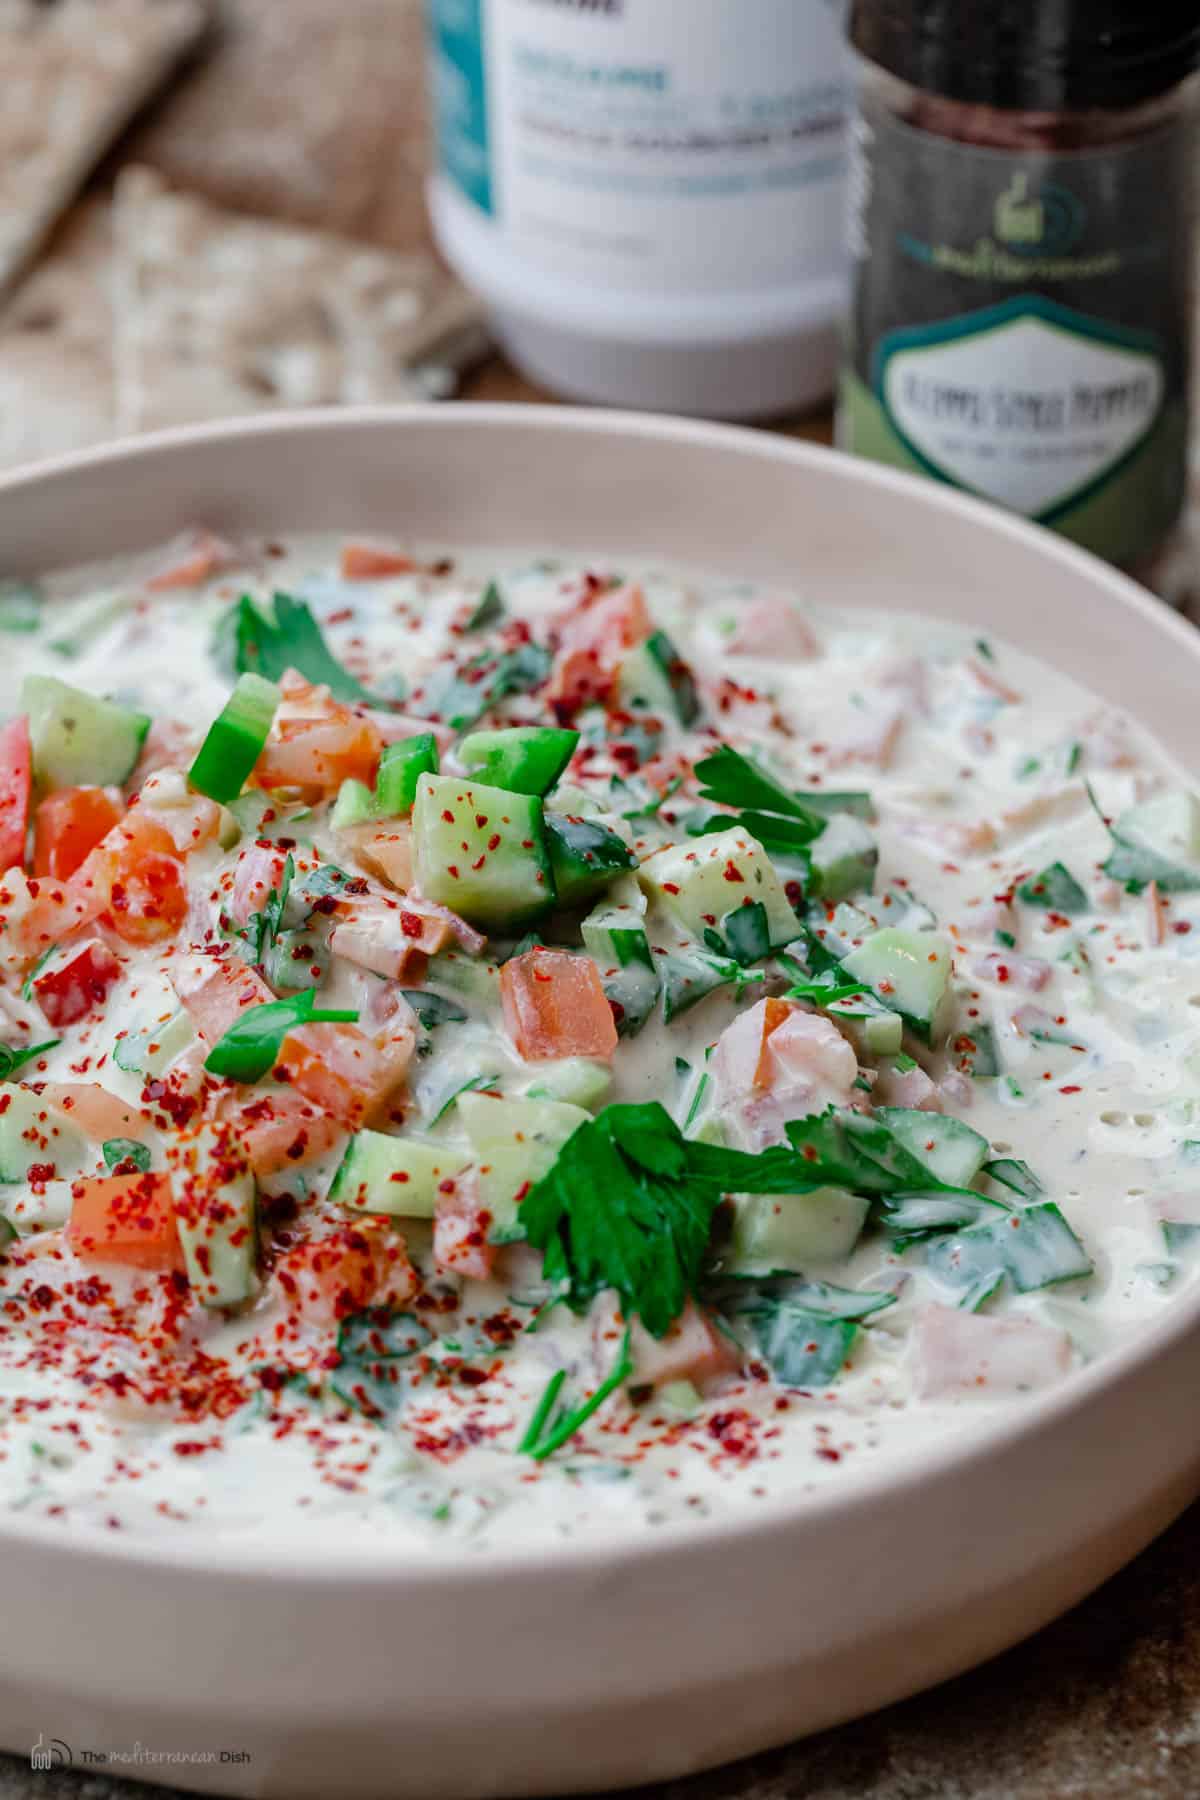 A bowl of authentic Middle Eastern tahini salad